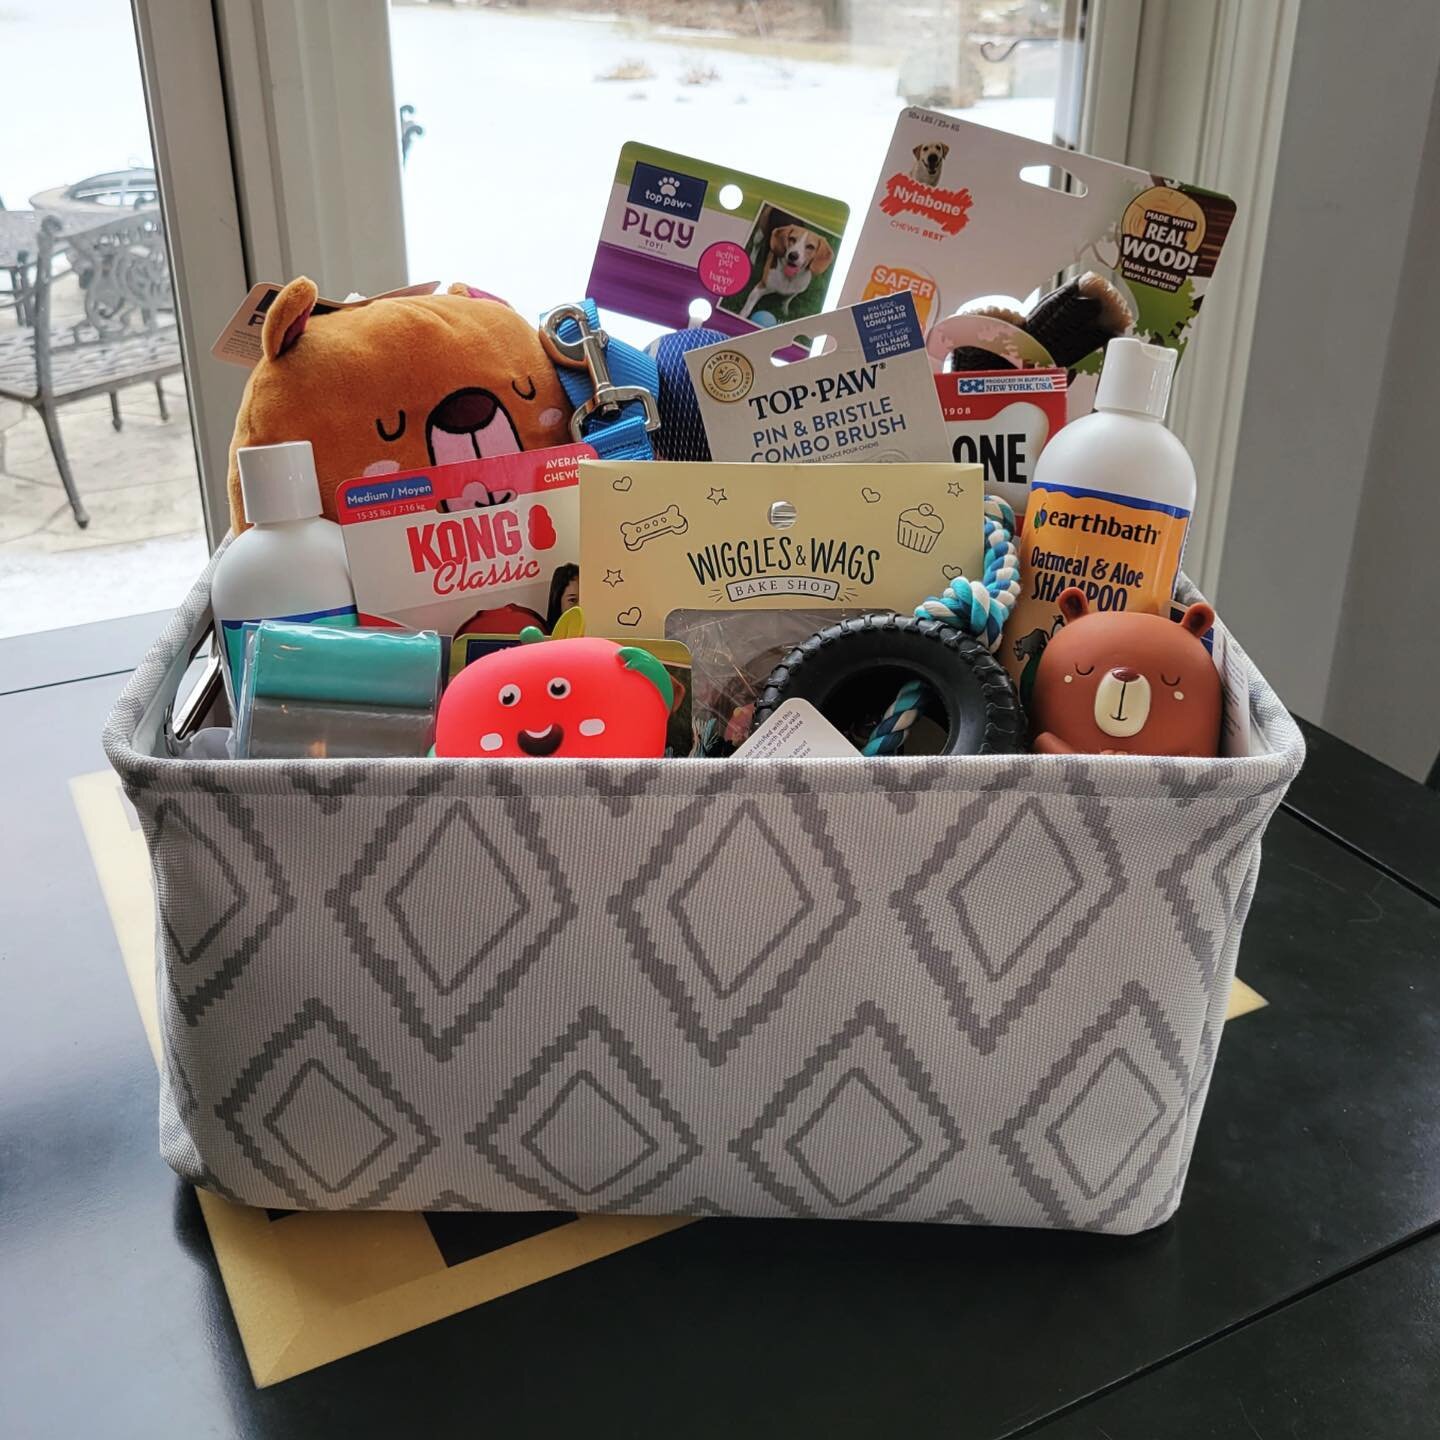 The Hamilton Education Foundation recently held their annual gala to raise money to support educational grants for the Hamilton School District! The Leo Club donated a dog themed basket filled with toys, treats, hair care, and more to the silent auct